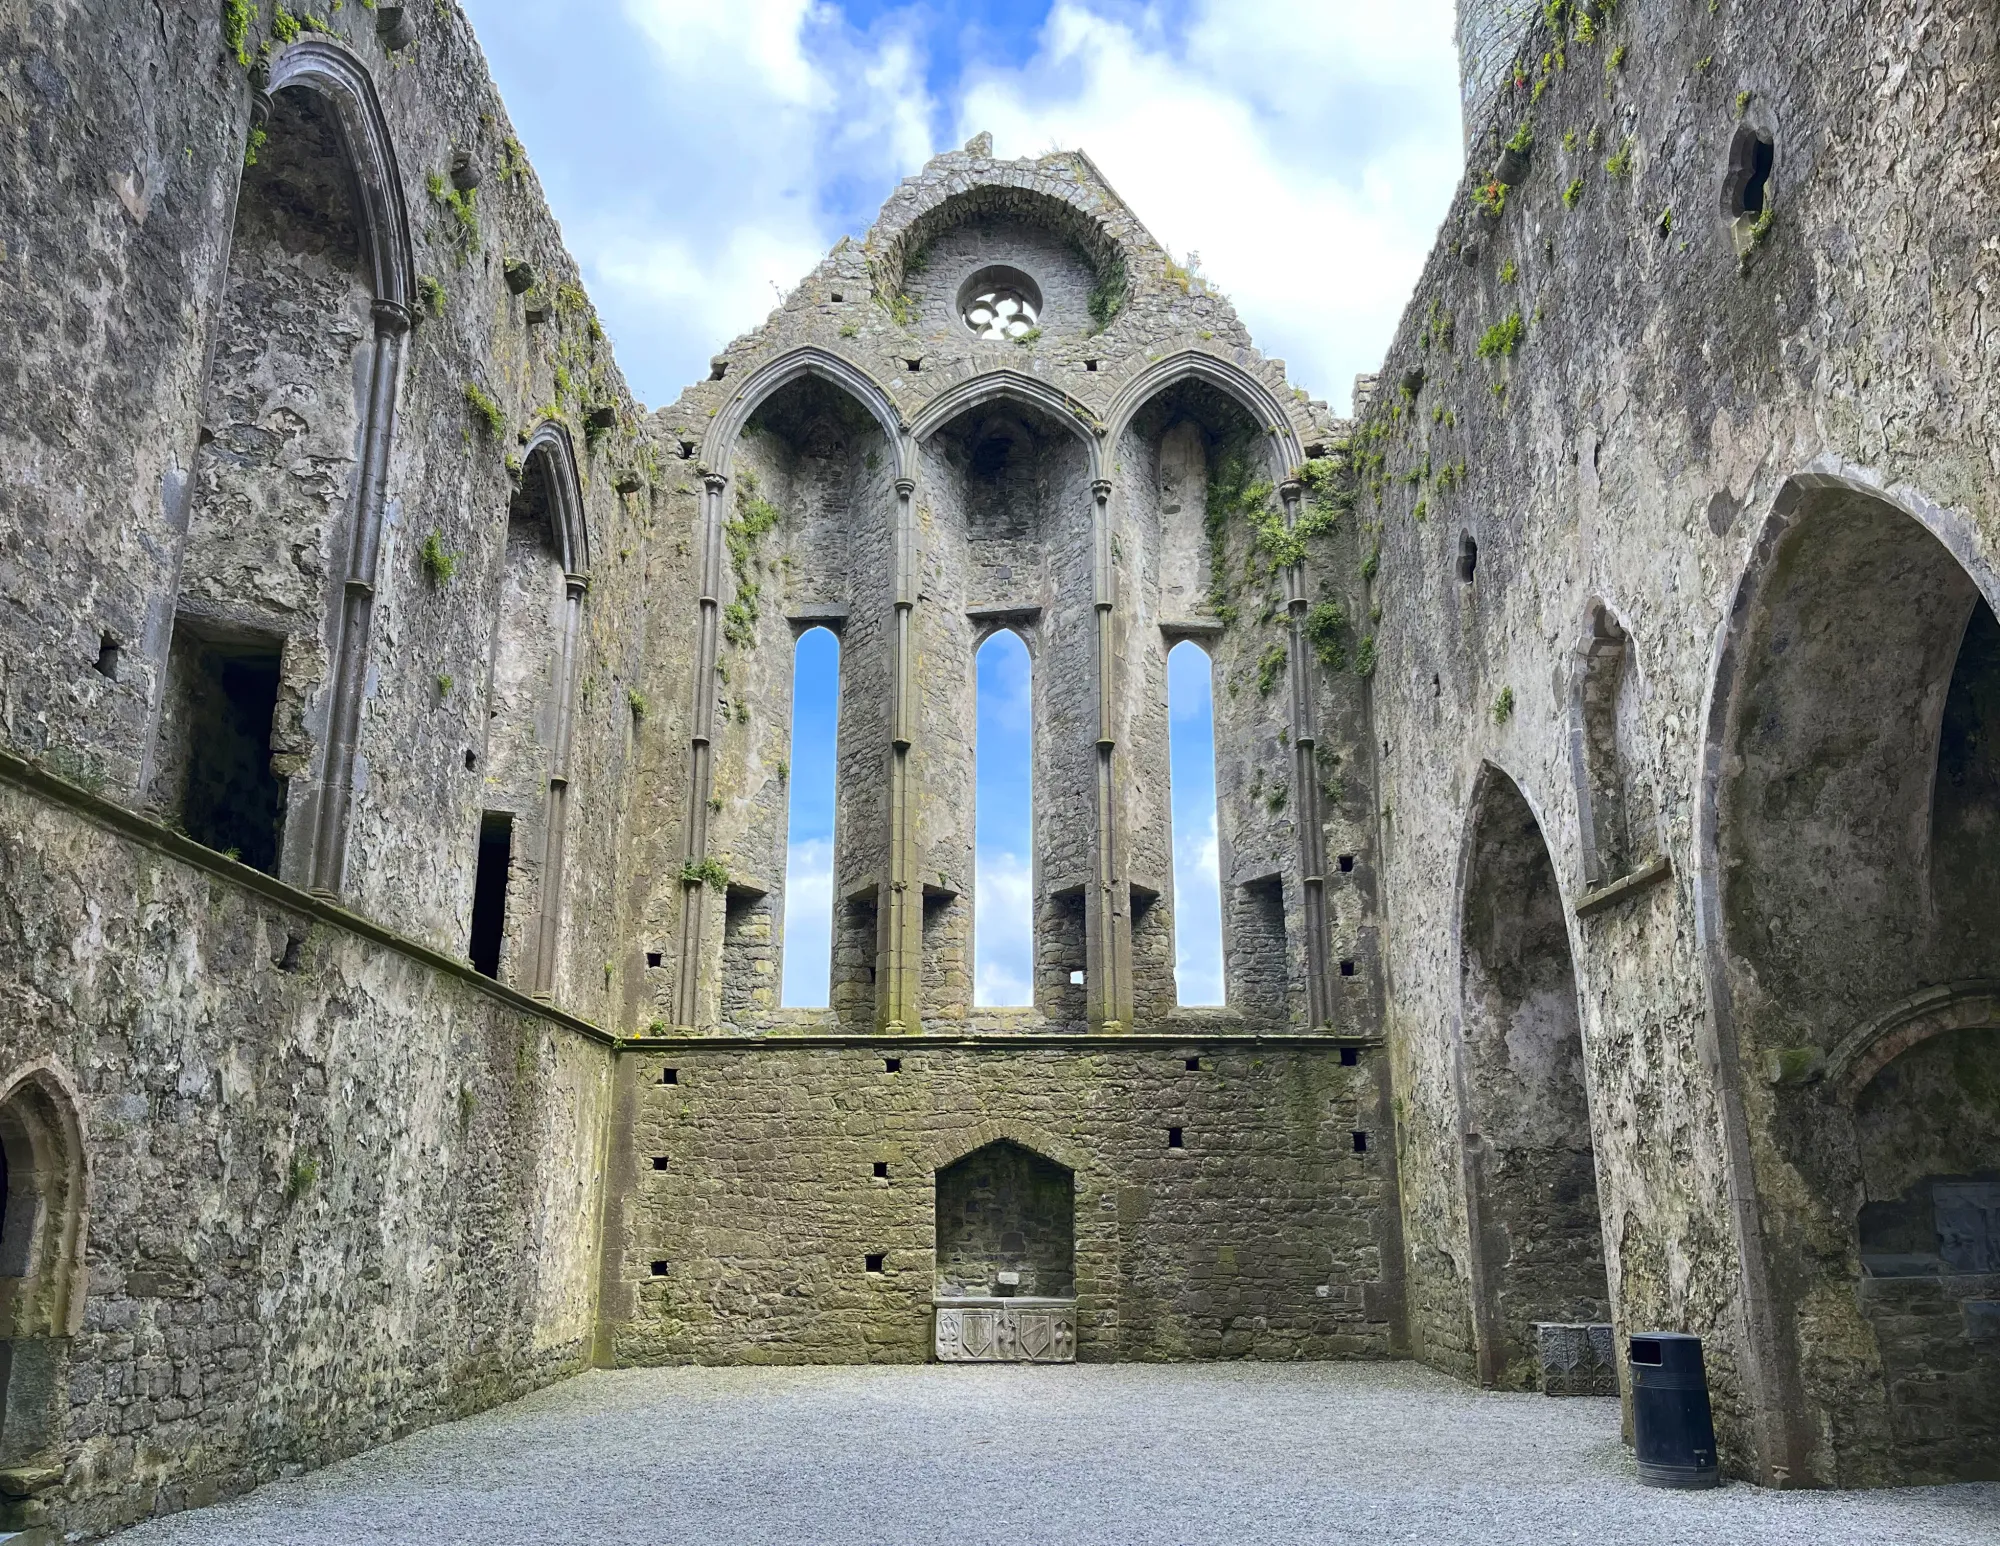 Stone arches in the ruins of a church